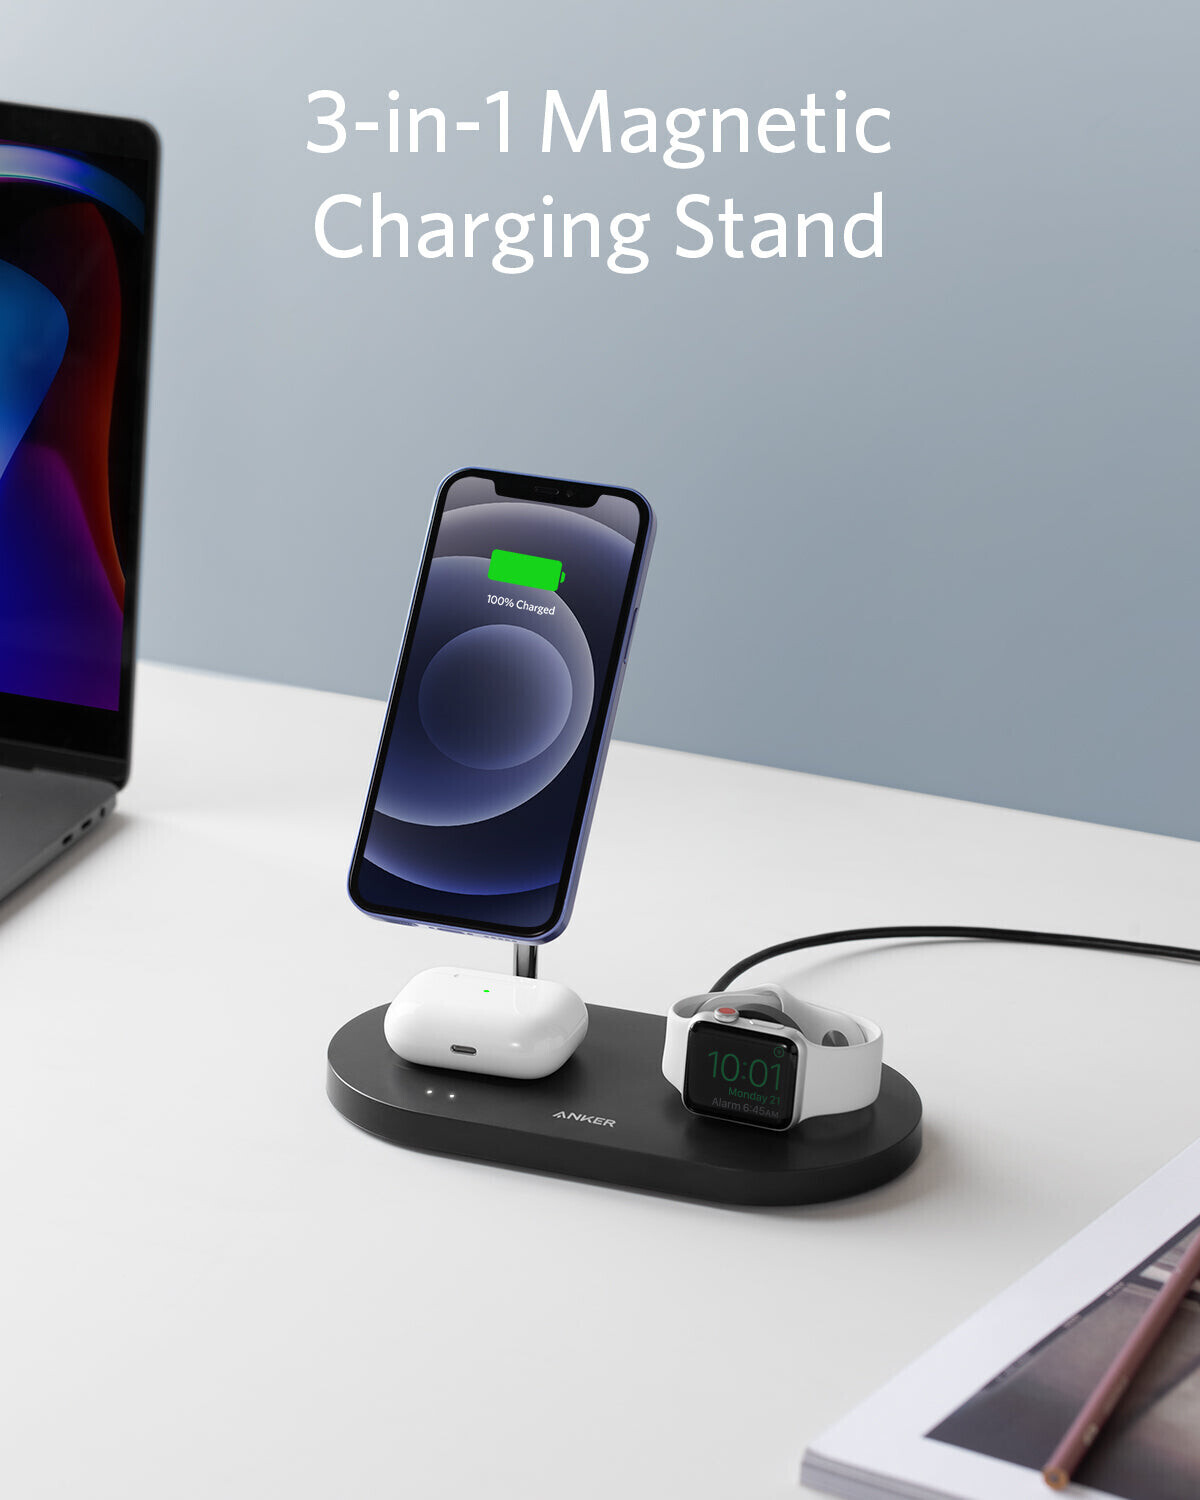 Anker 533 Magnetic Wireless Charger (3-in-1 Stand) ab 69,99